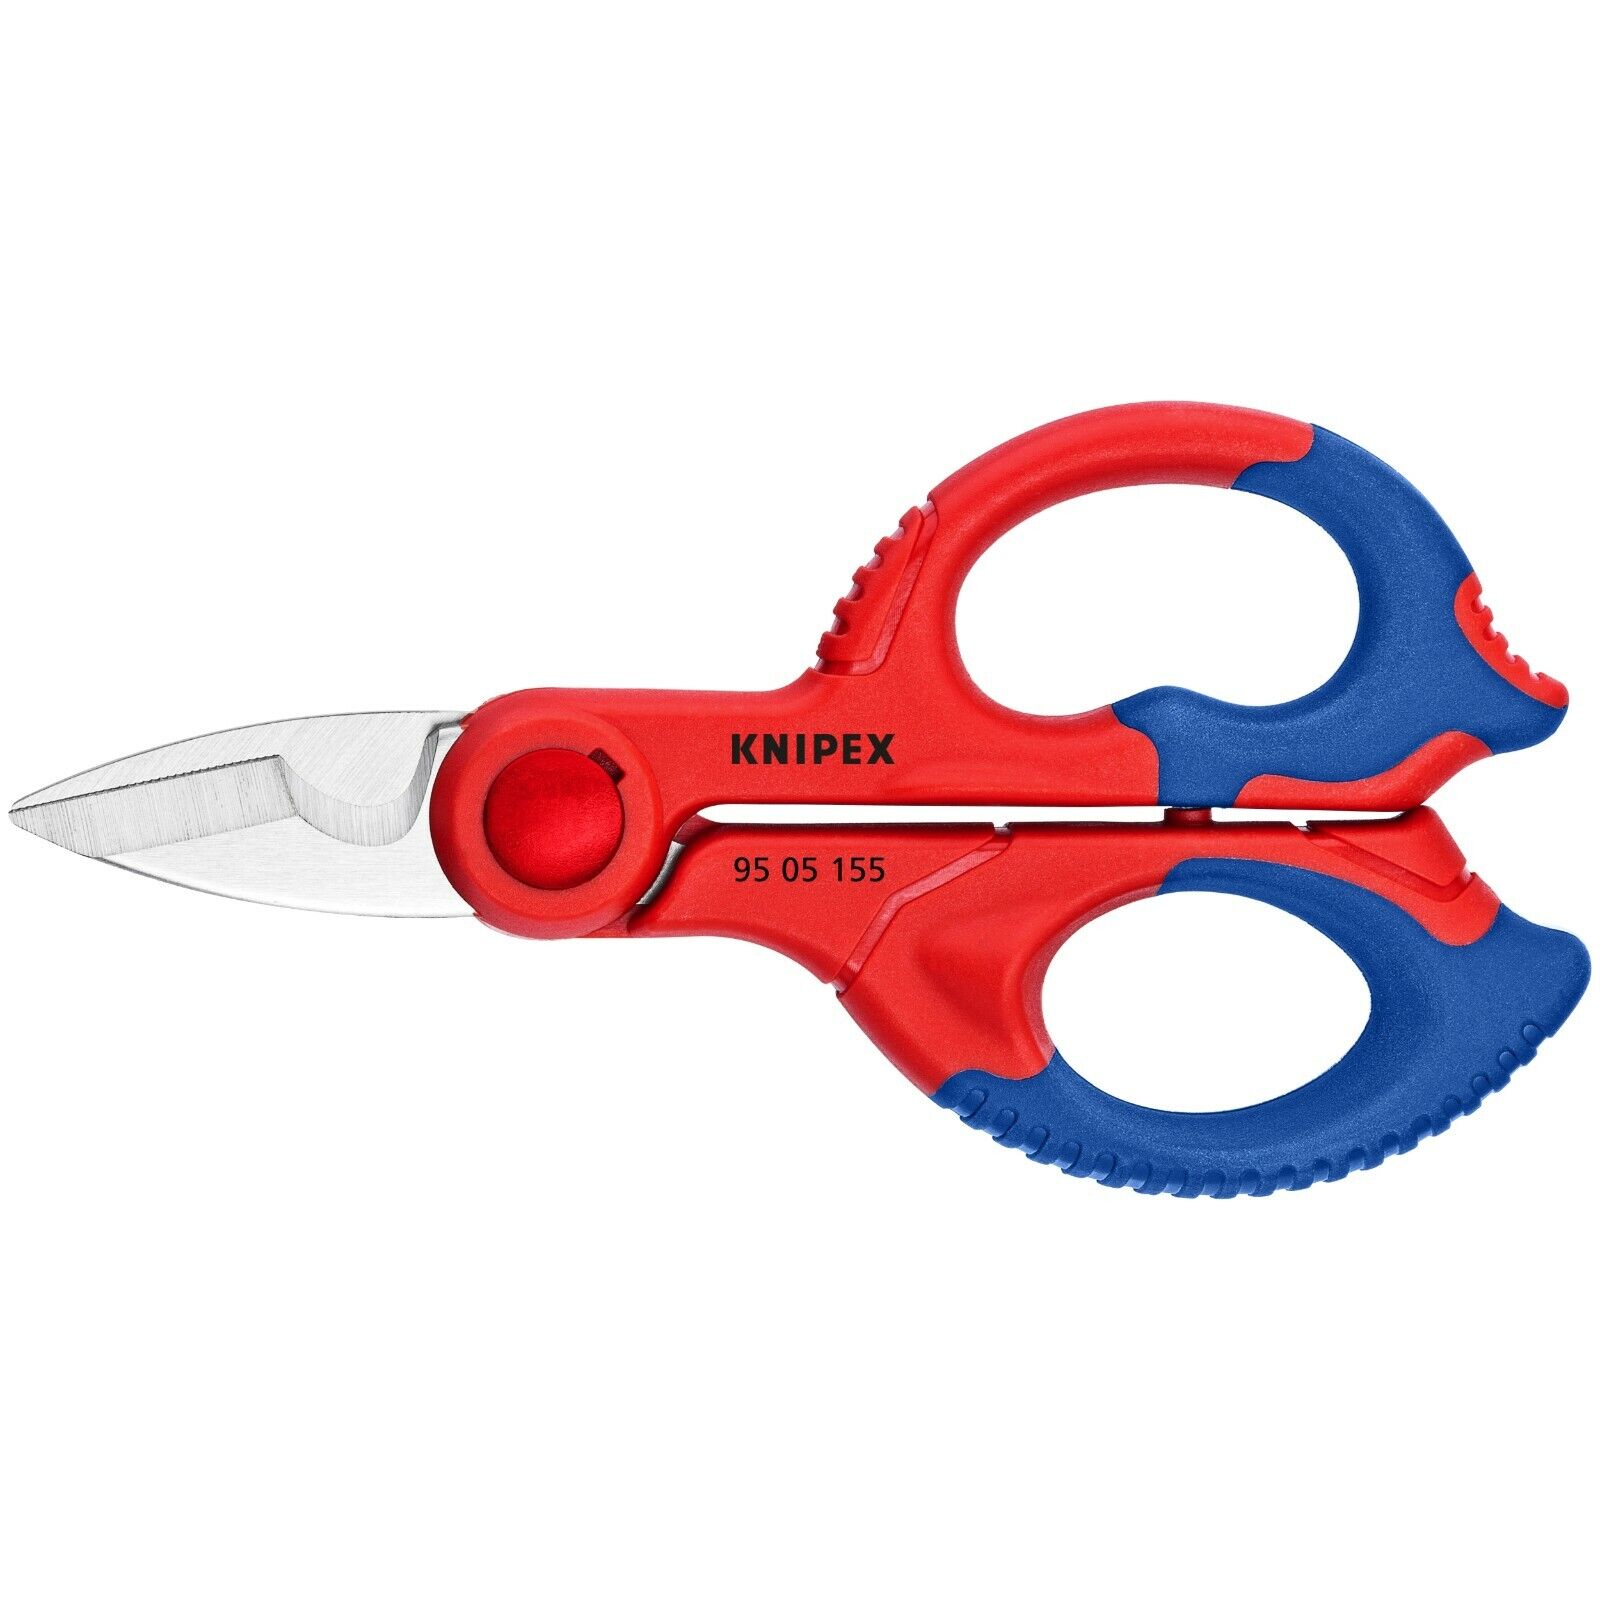 Knipex Electrician Shears With Belt Clip 6 1/4" Red